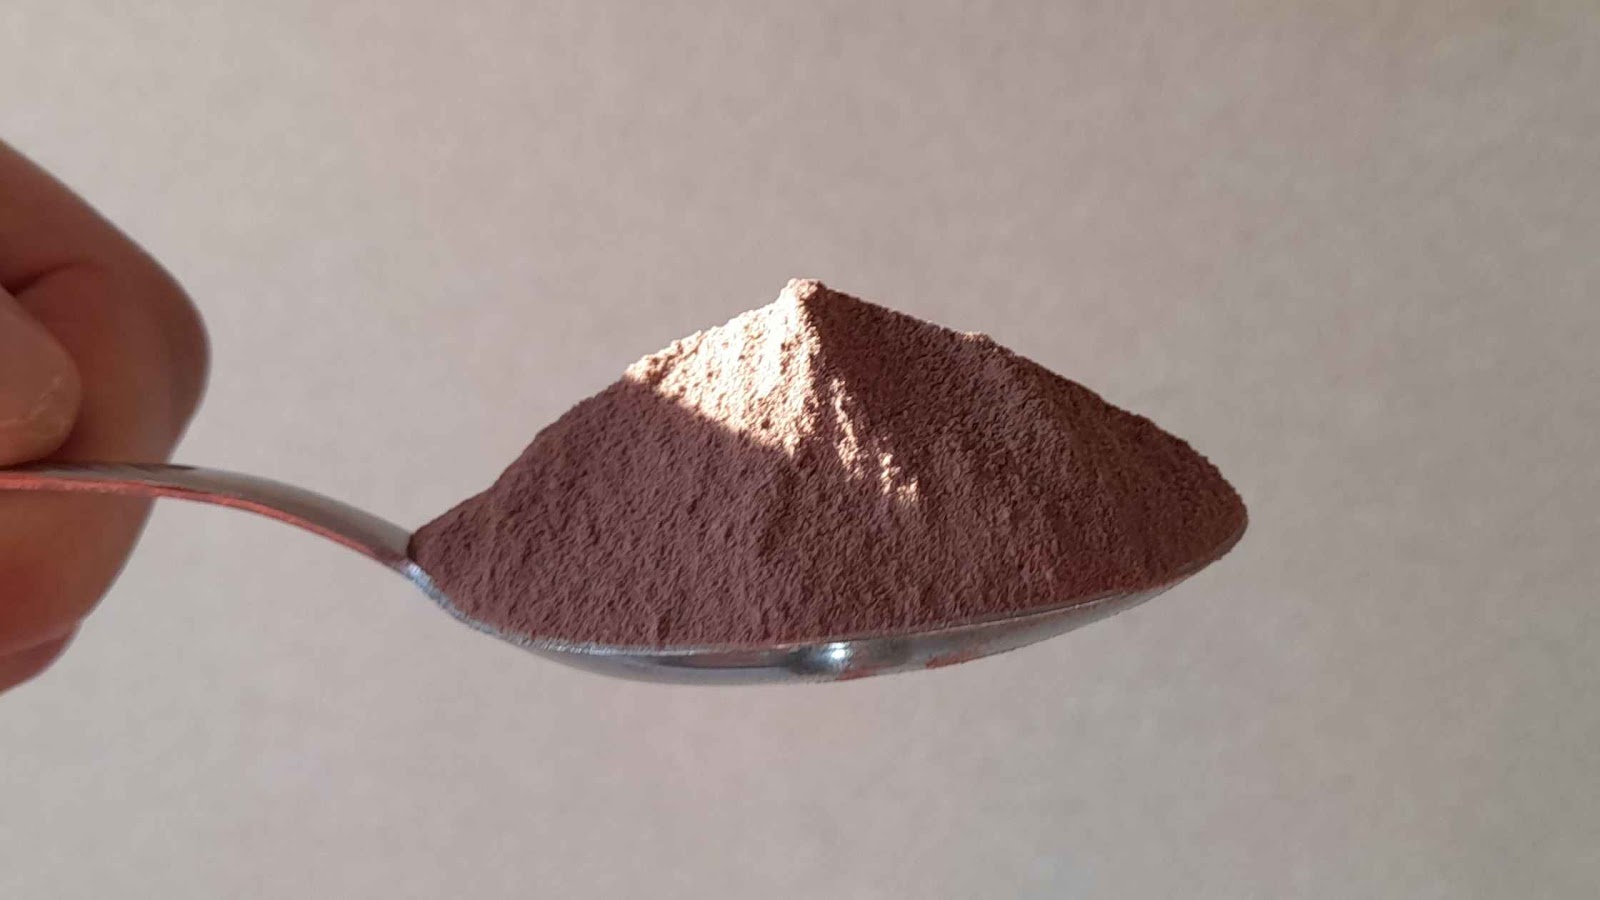 An overly full tablespoon of chocolate powder.